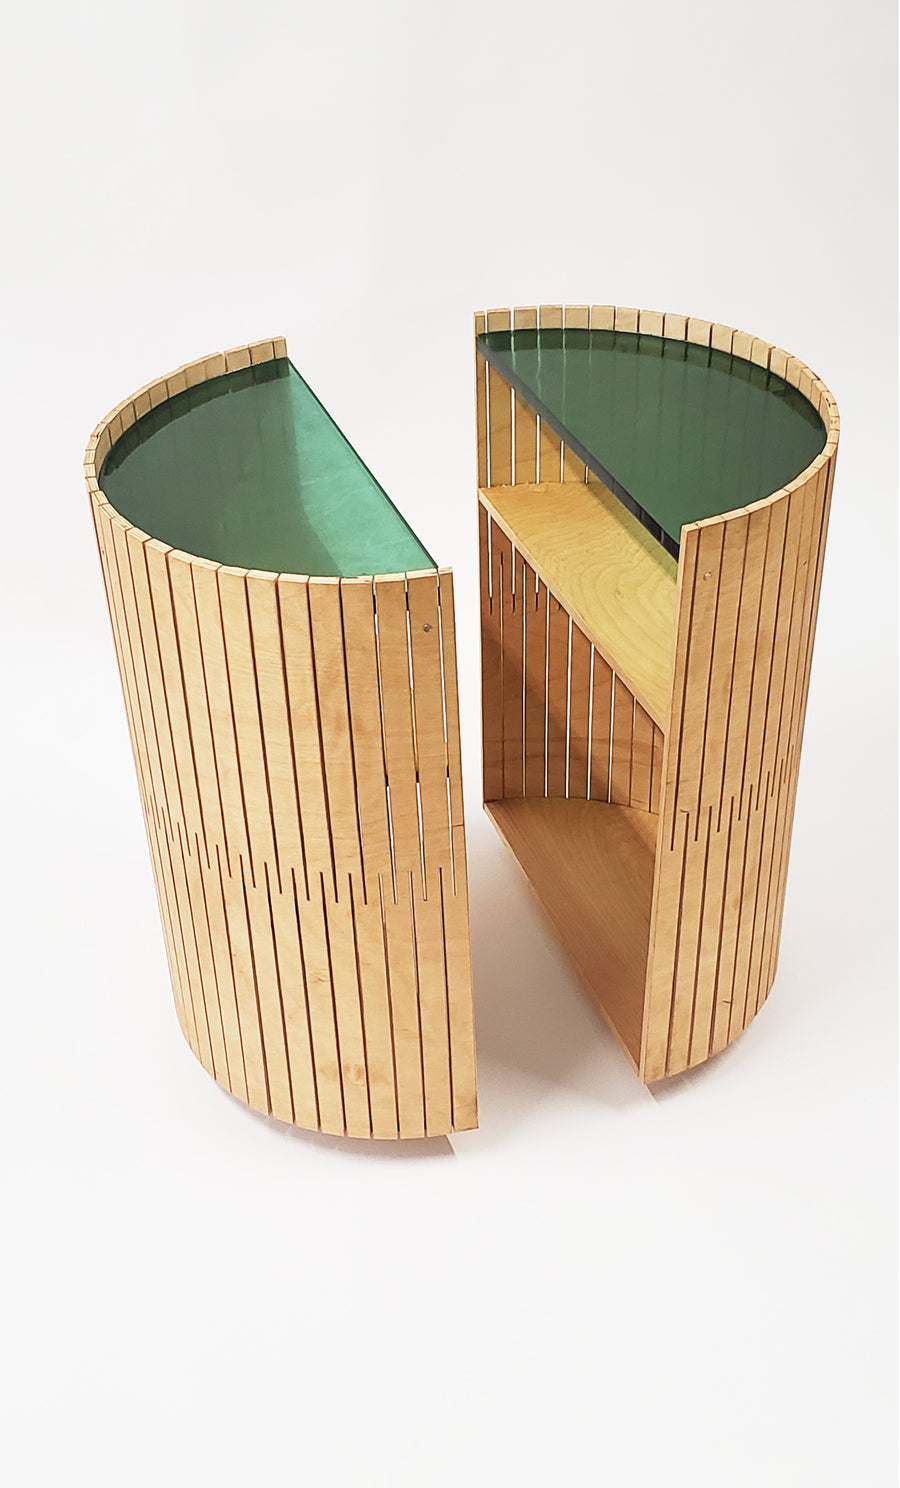 Left-hand view of the side table entitled Laguna Table by Jason Robinson. View highlights the ability to split the table into two parts.